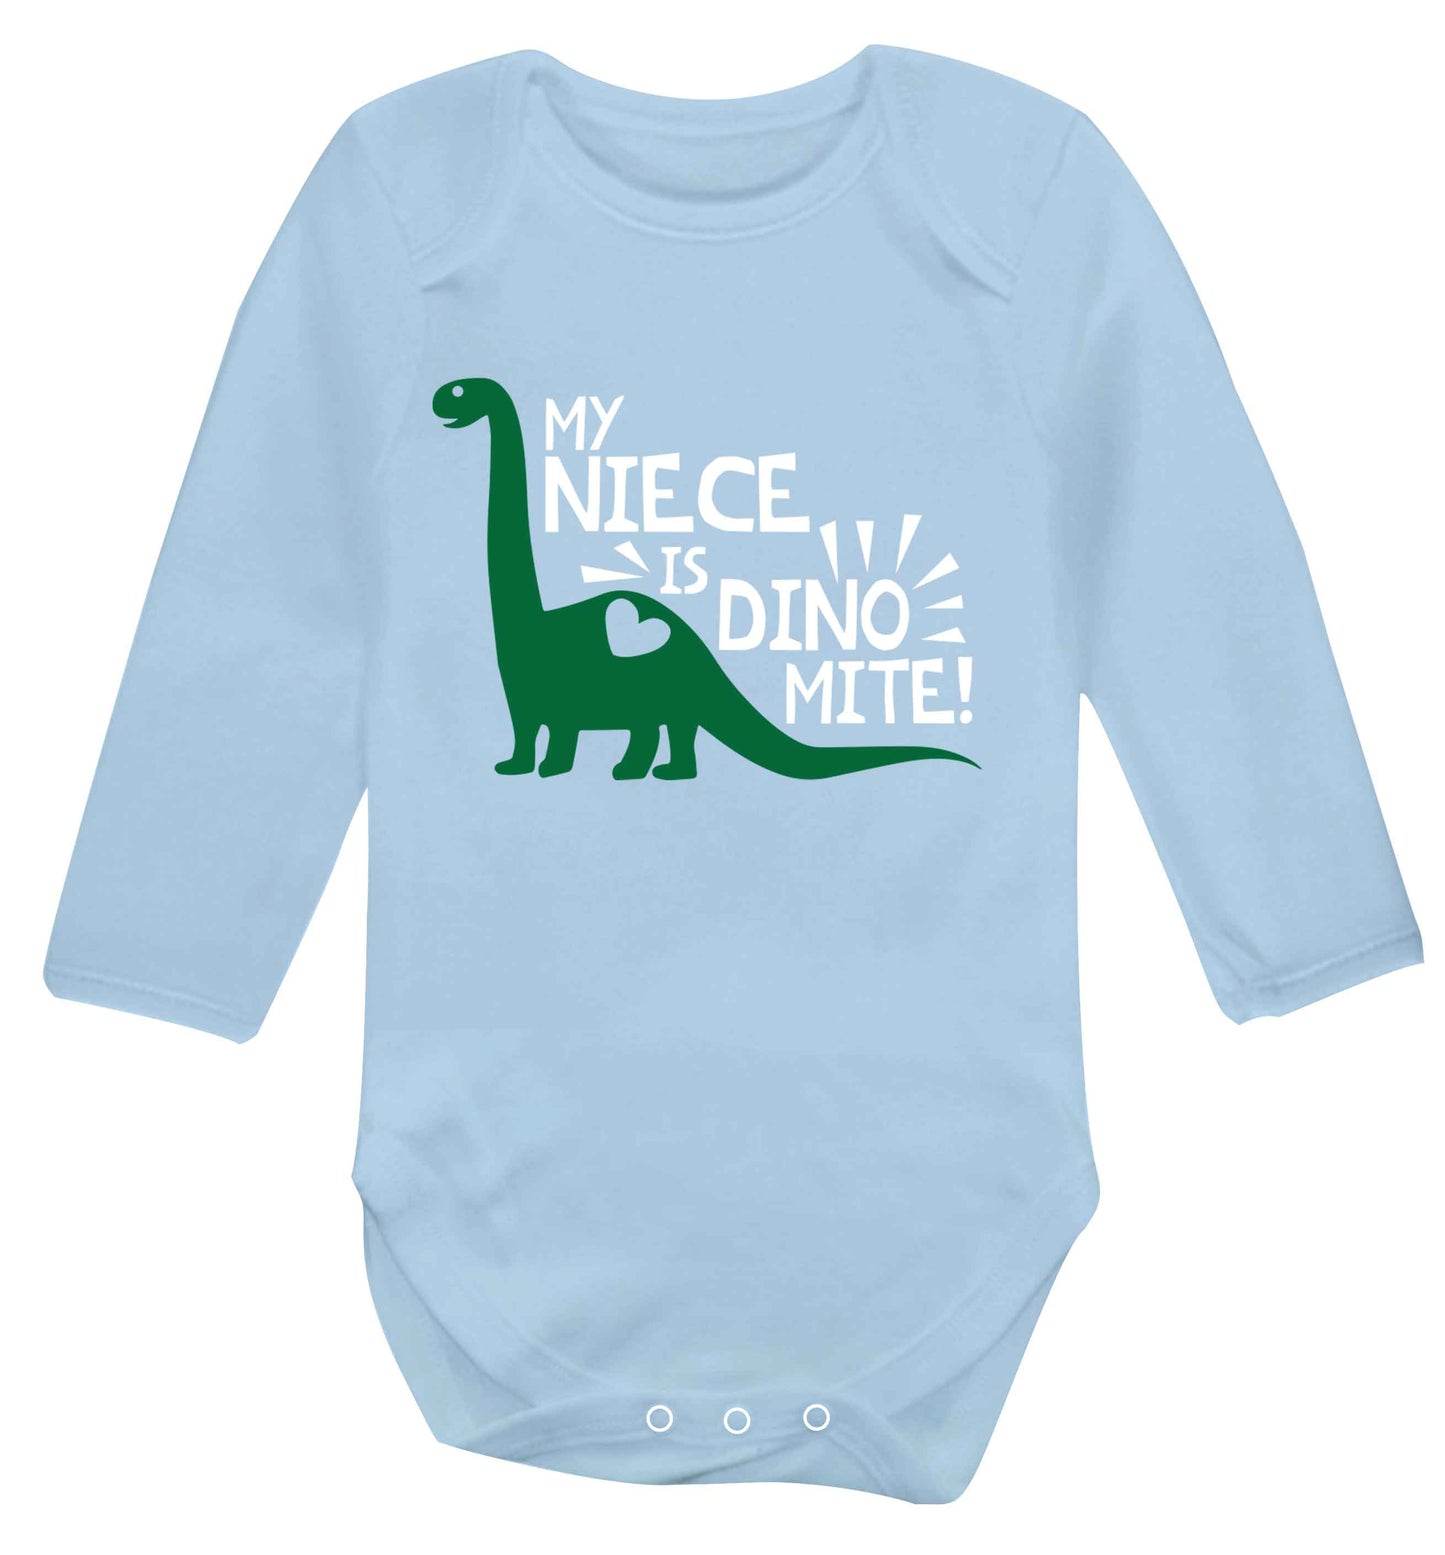 My niece is dinomite! Baby Vest long sleeved pale blue 6-12 months